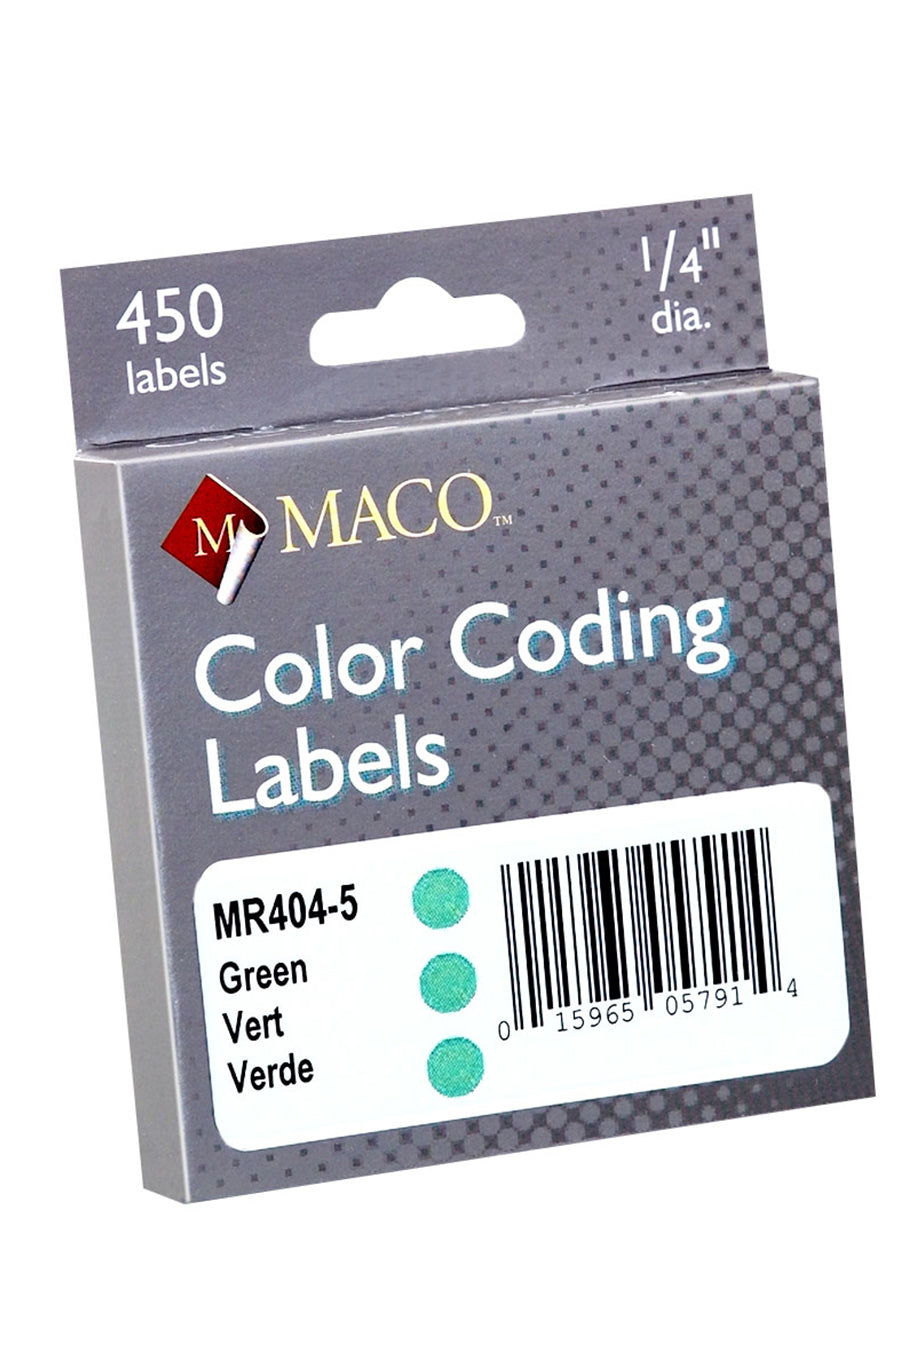 1/4" Dia. Color Coding Labels, Green, 450/On Roll in Dispenser Box